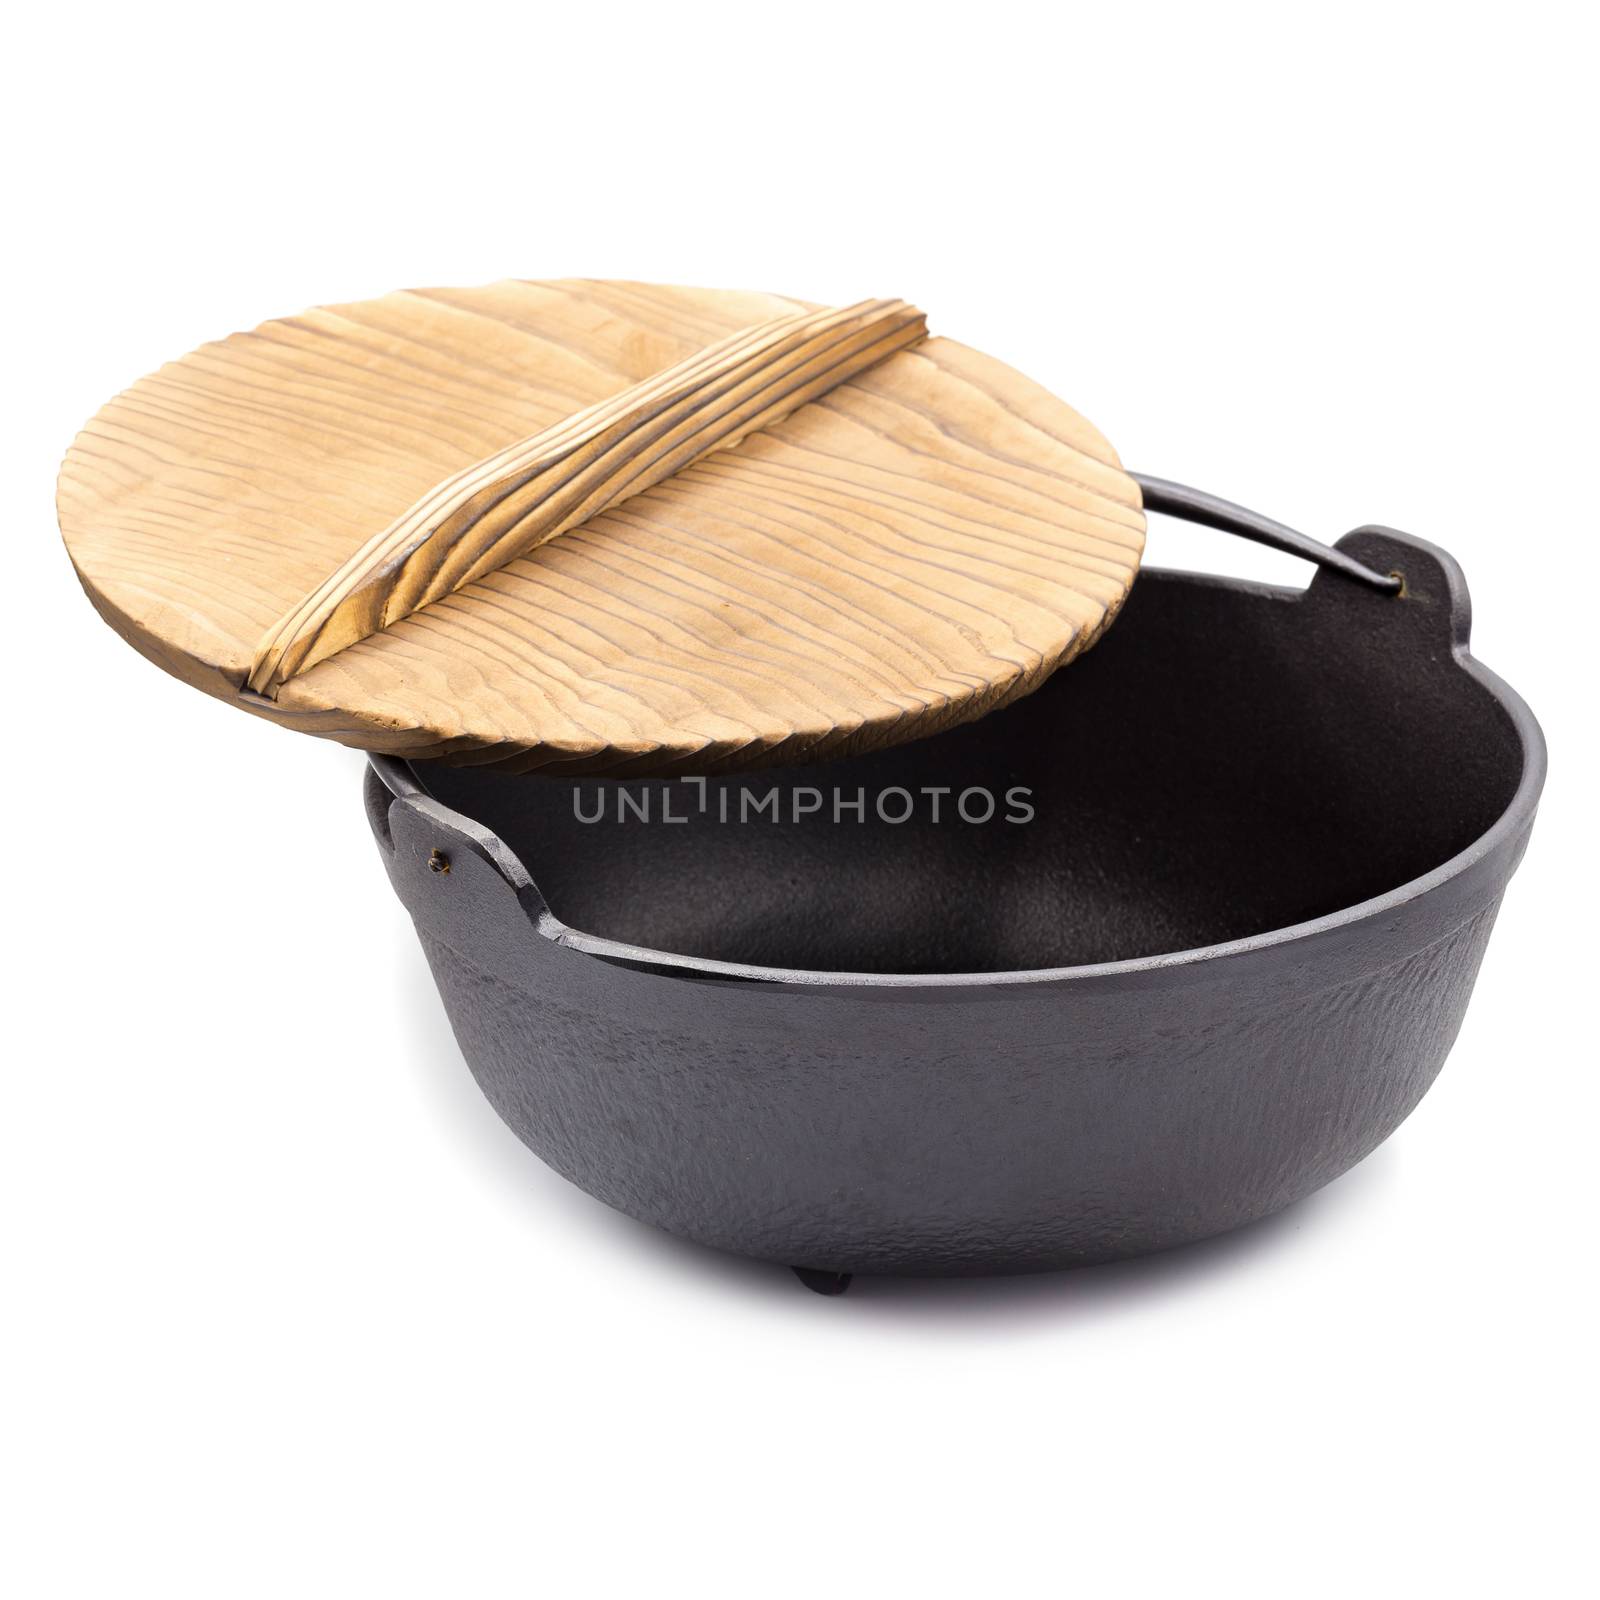 Japanese tableware, nabe for hot pot cooking, hotpot with wooden lid.